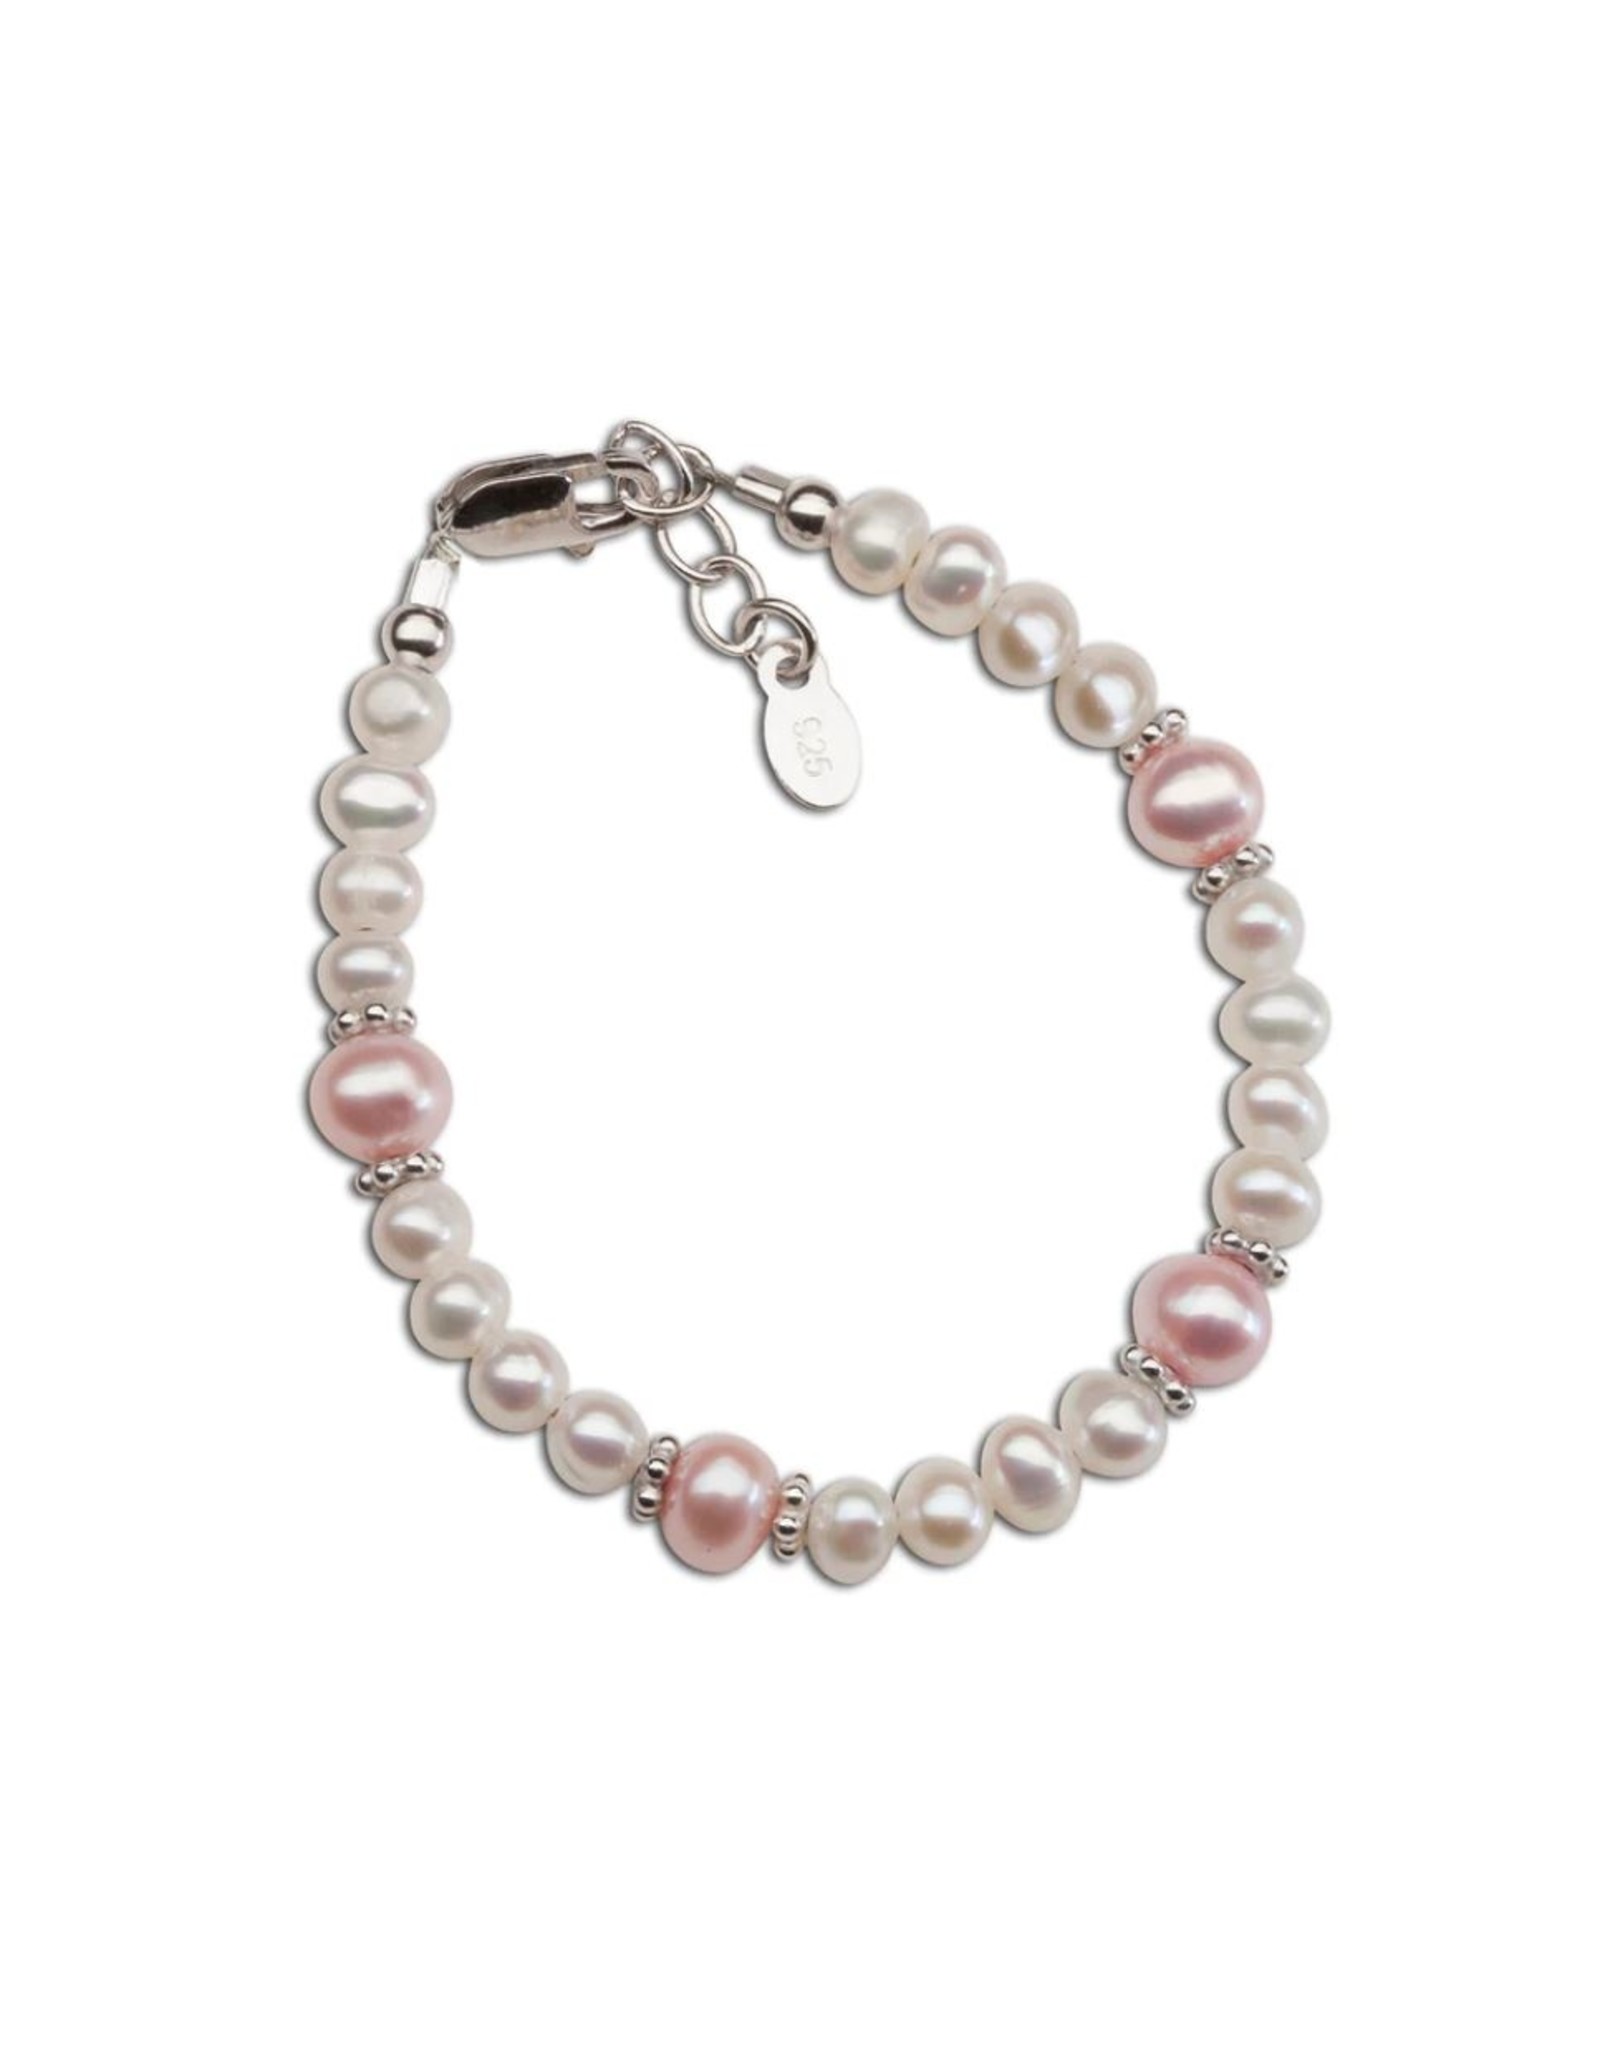 Cherished Moments Addie Silver Bracelet with Pink and White Freshwater Pearls